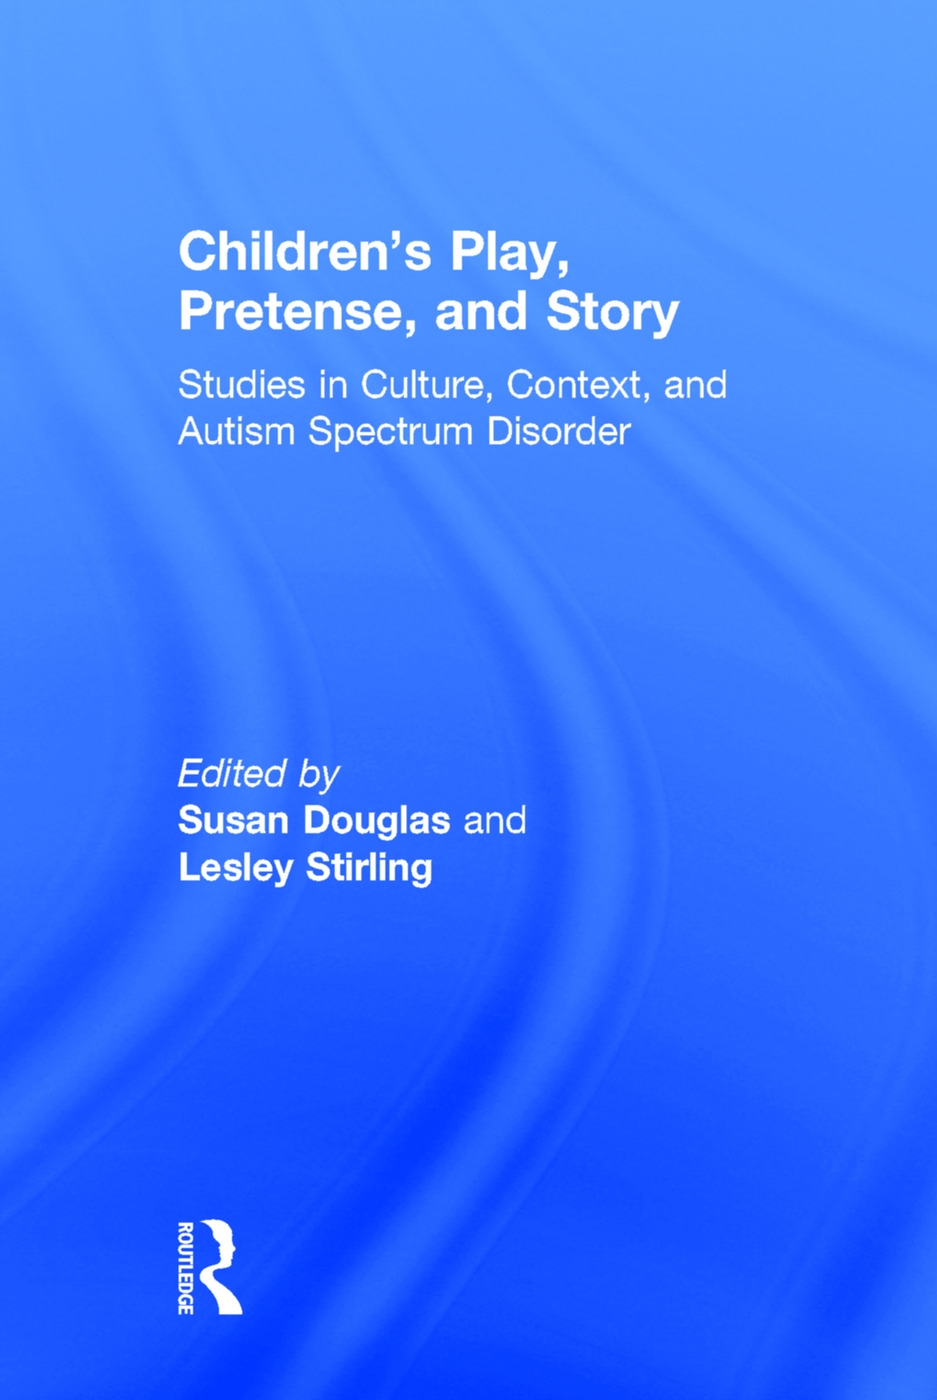 Children’s Play, Pretense, and Story: Studies in Culture, Context, and Autism Spectrum Disorder